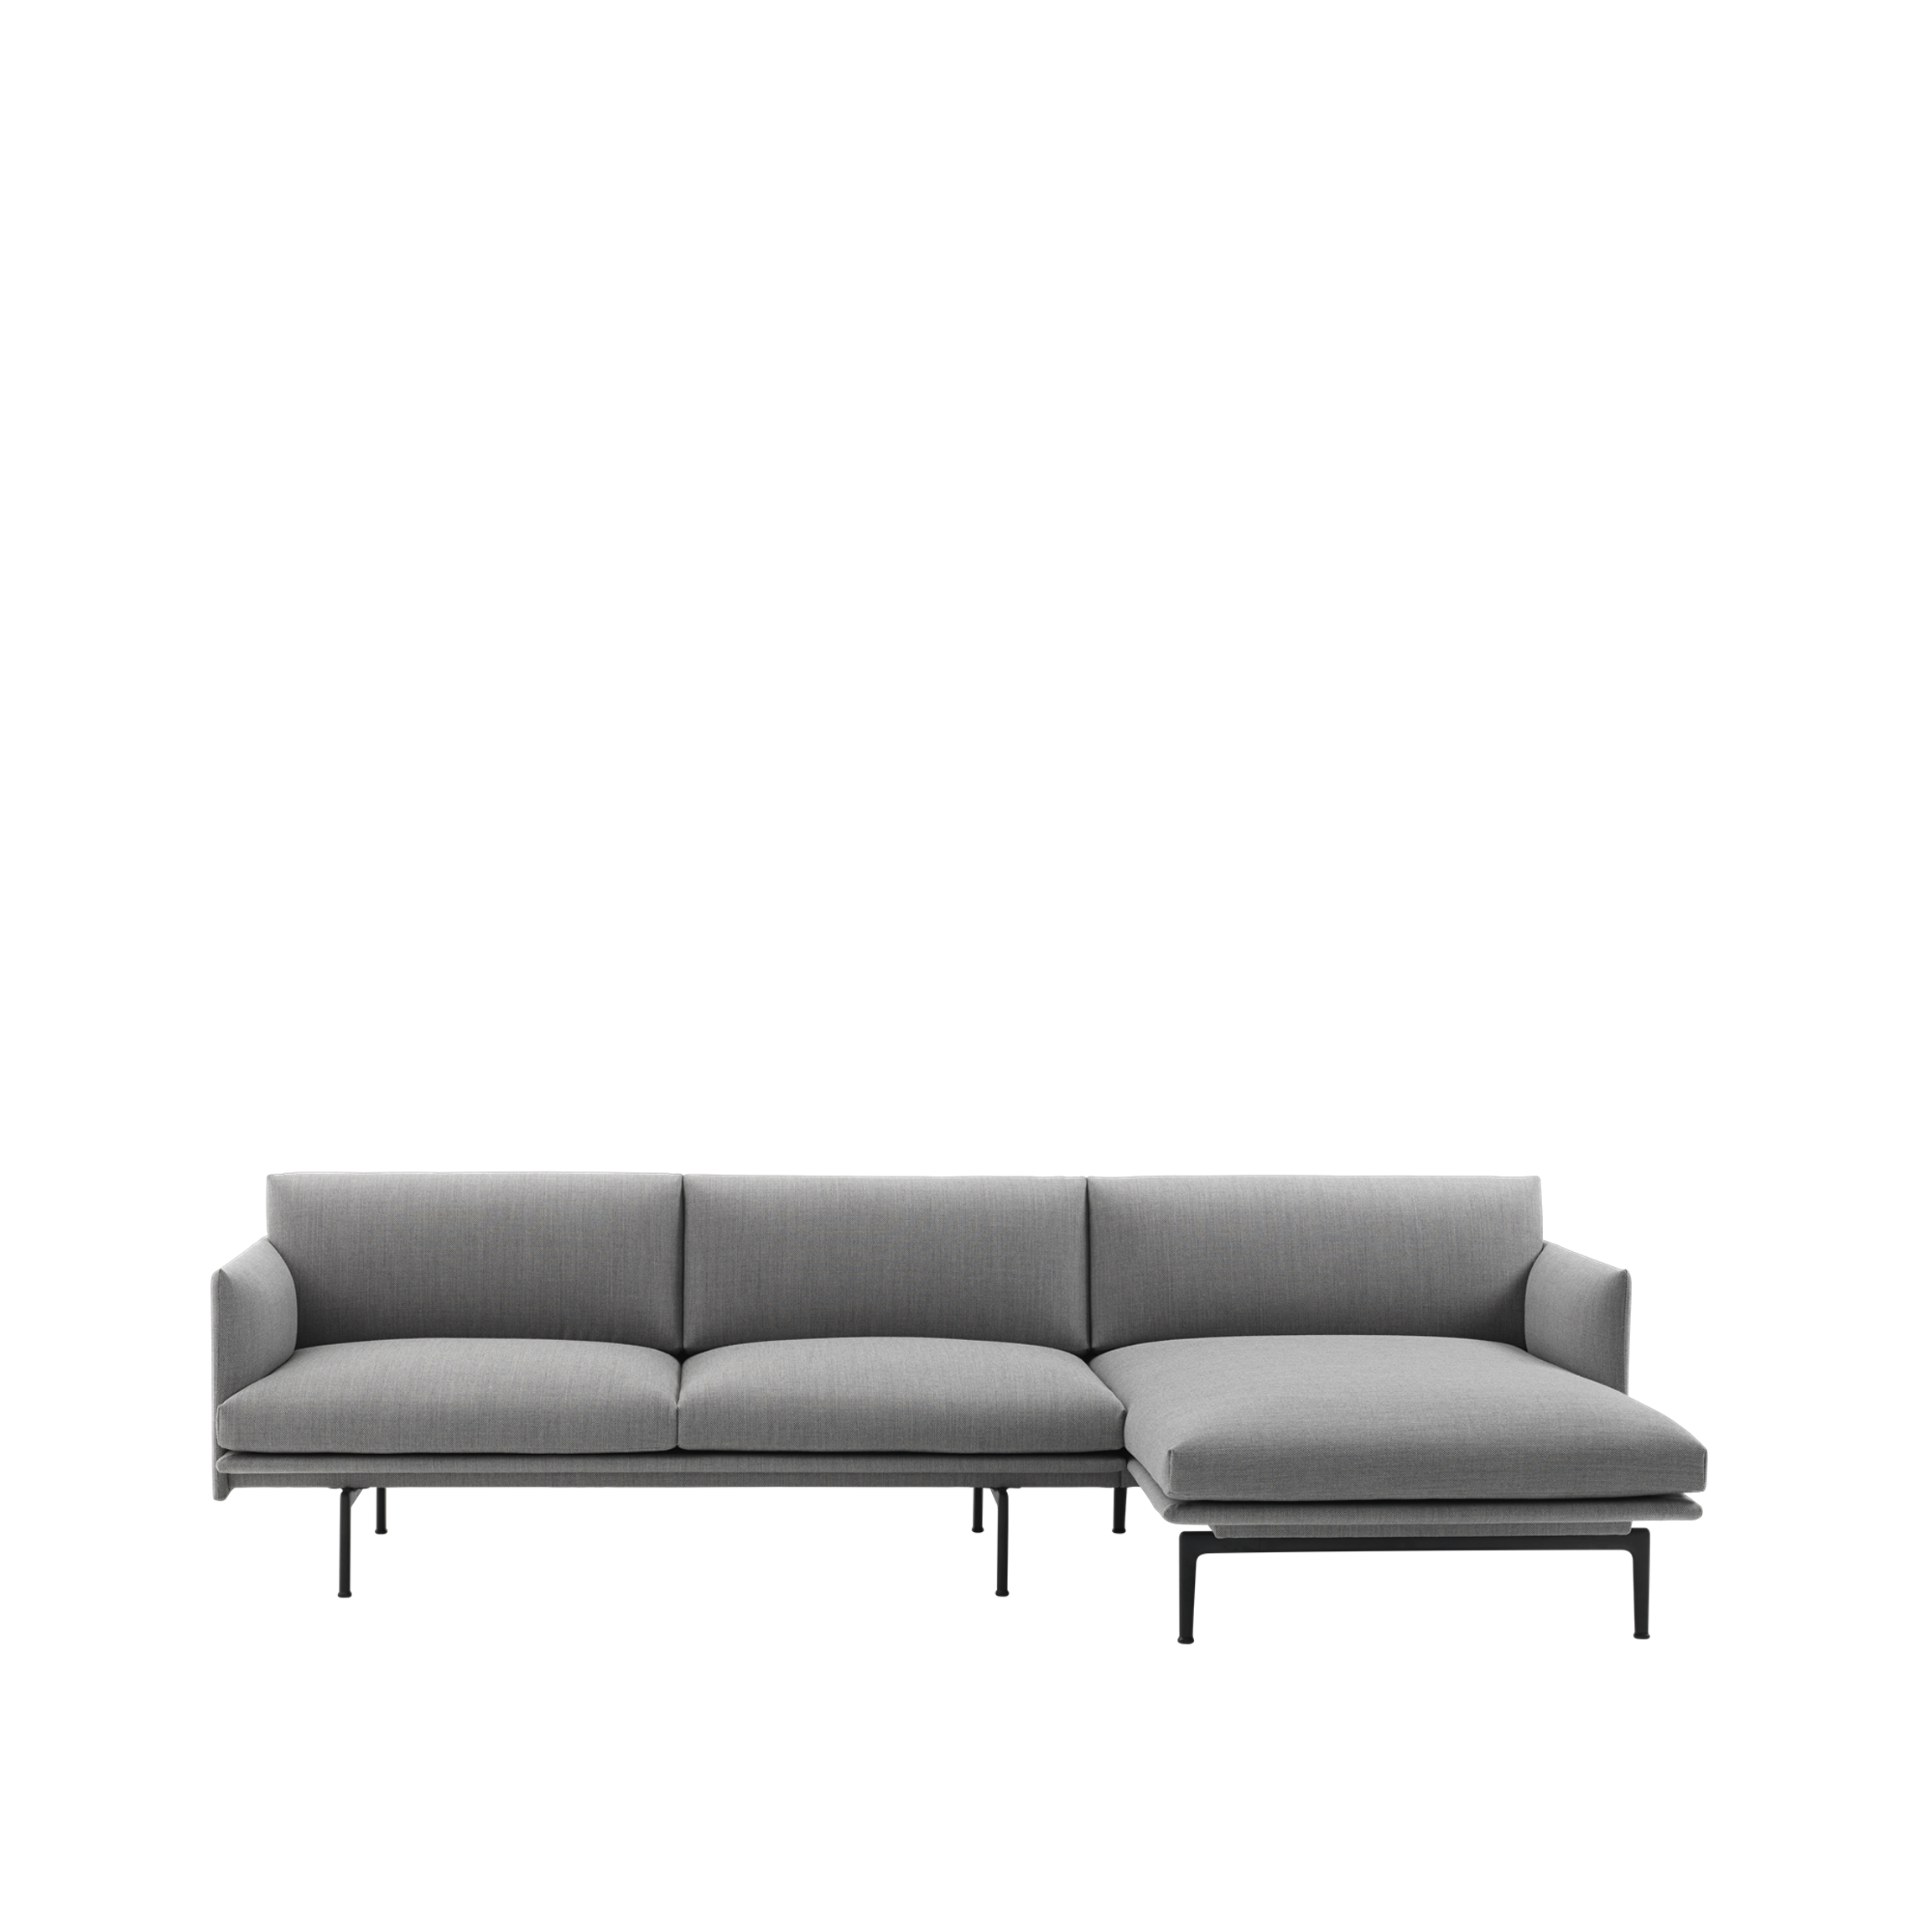 Luxury Chaise Longue PNG Image